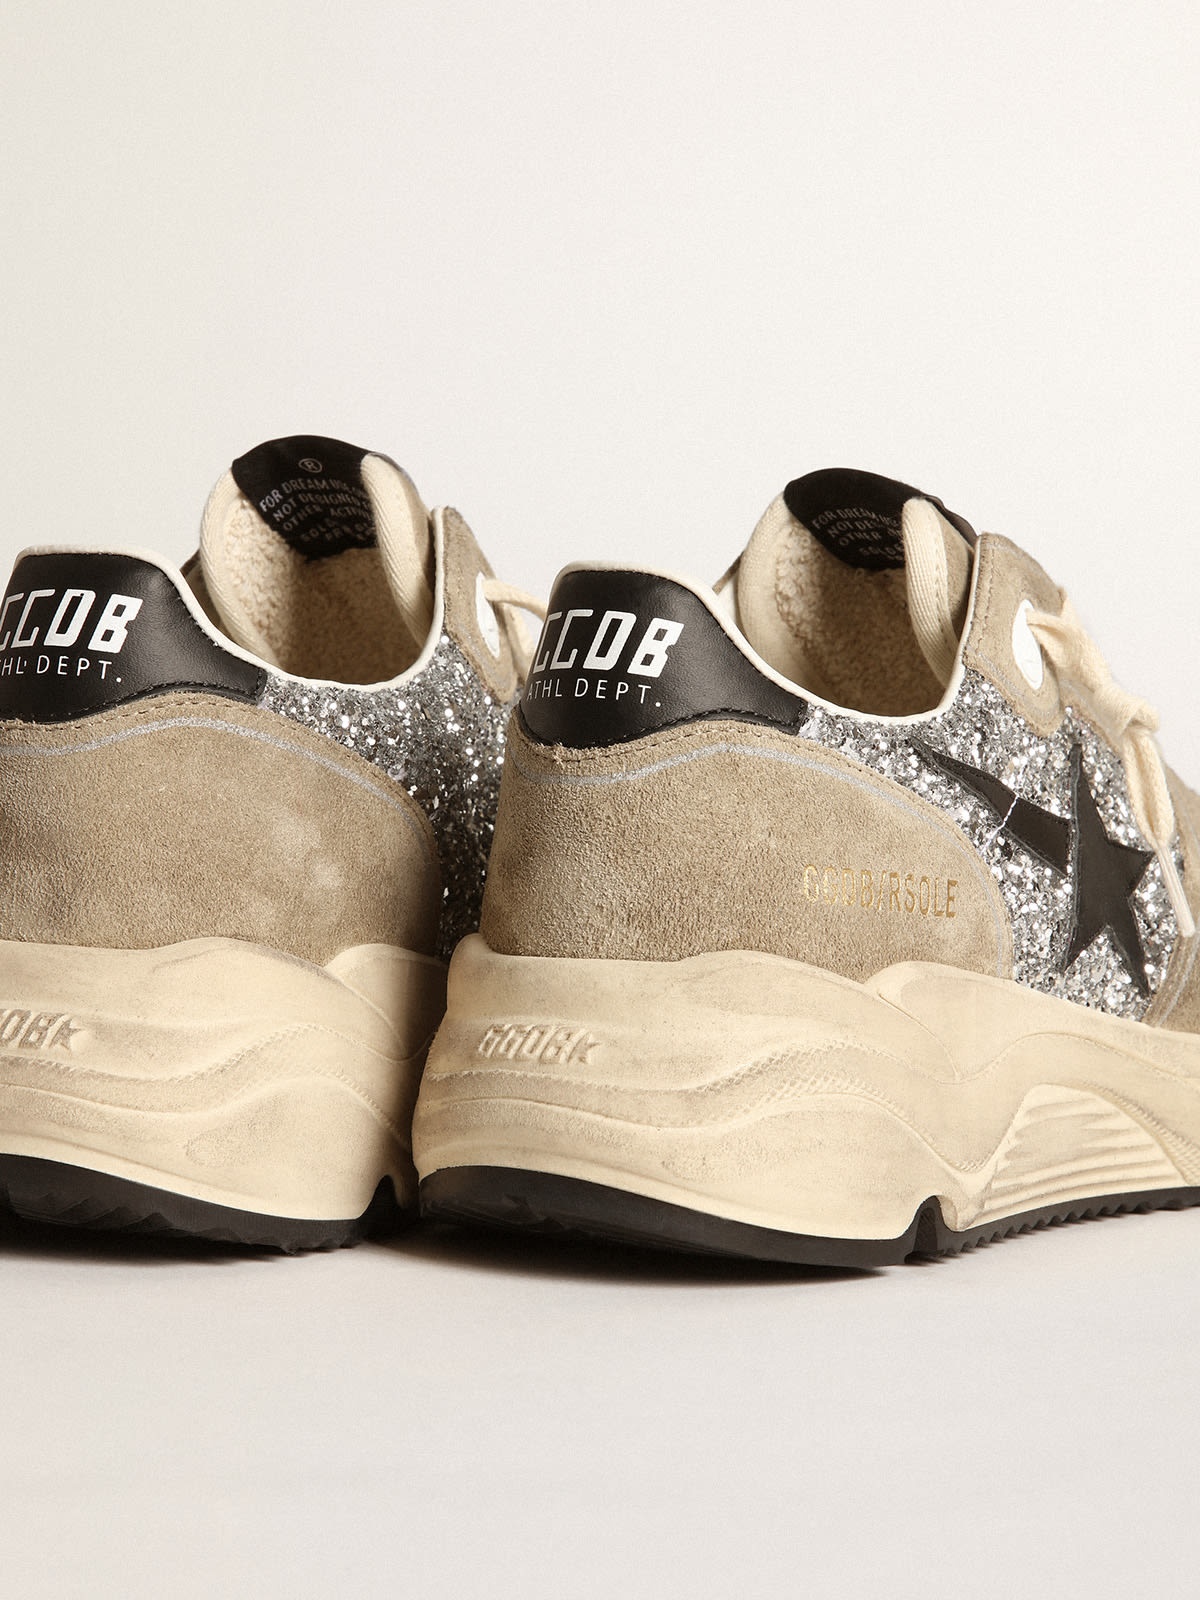 Running Sole sneakers in silver glitter and dove-gray suede with black leather star - 4